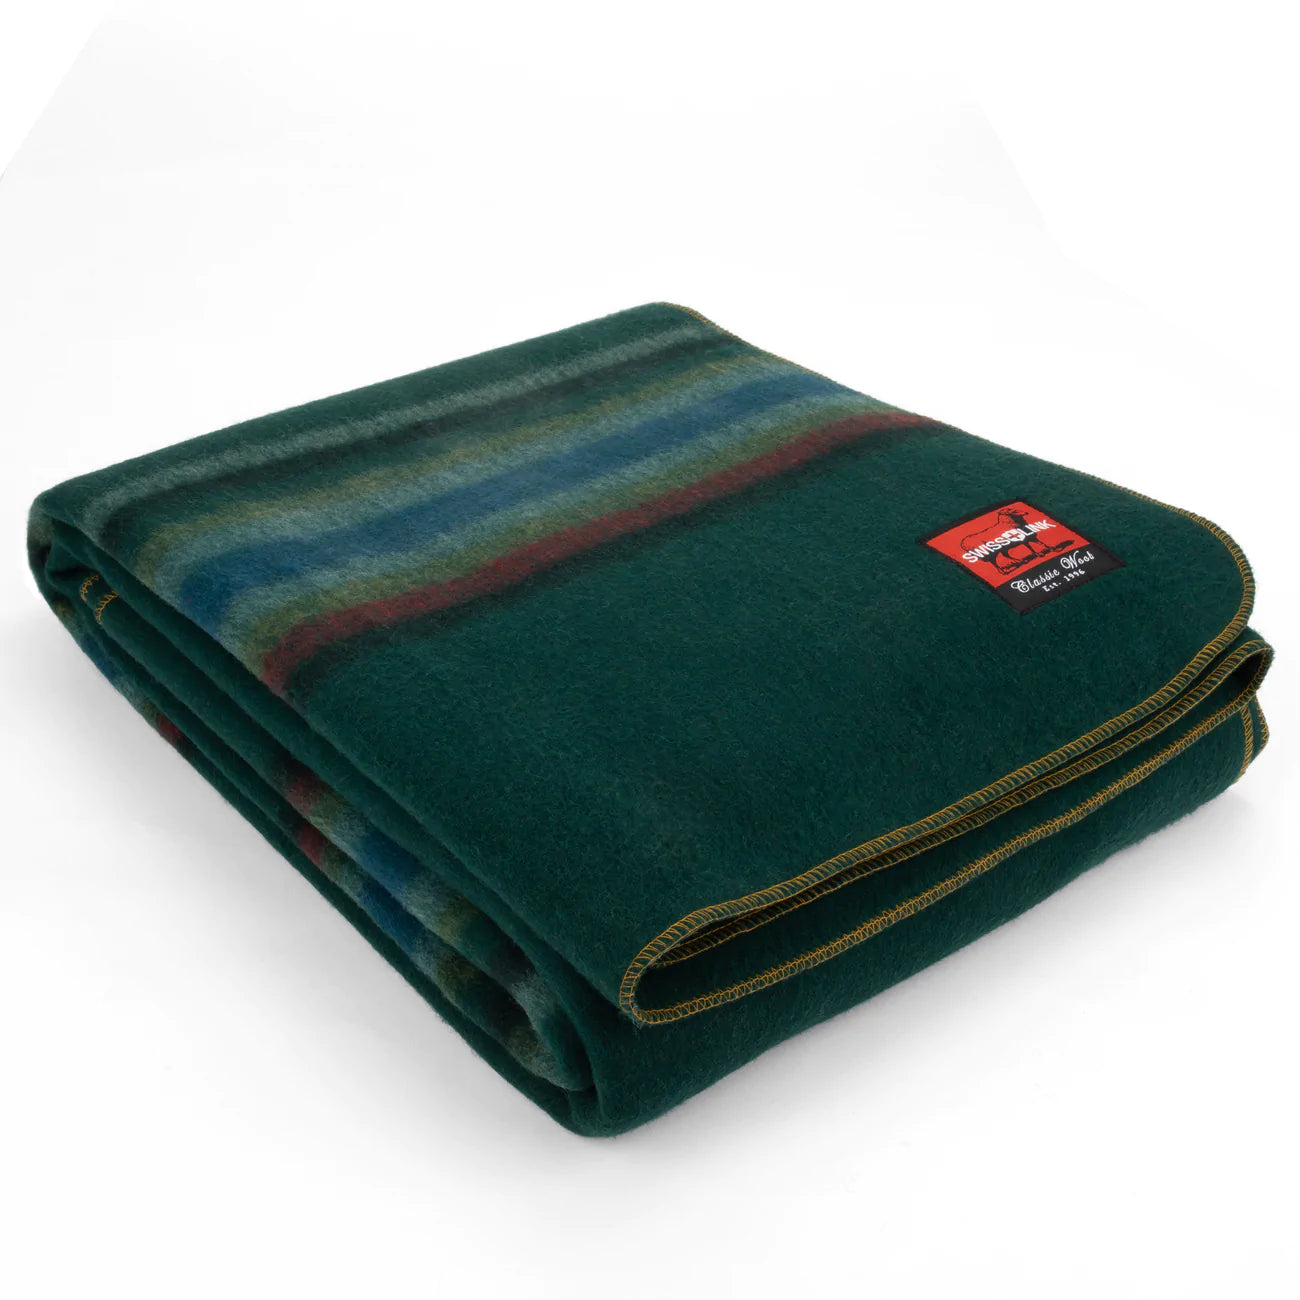 Swiss Link Forest State Classic Wool Blanket